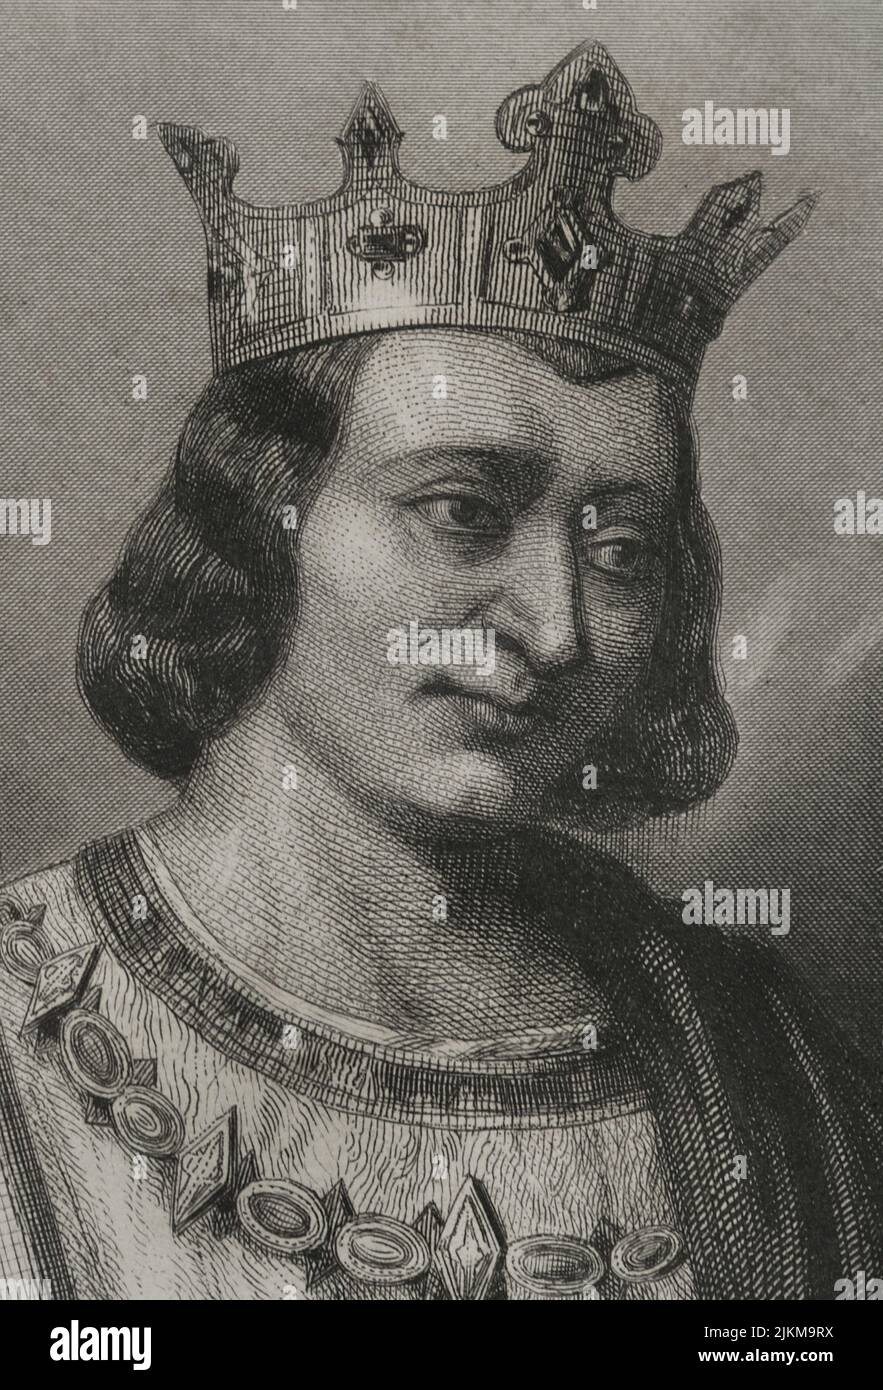 Louis IX or Saint Louis (1214-1270). King of France (1226-1270). Portrait. Engraving by Geoffroy. Detail. "Historia Universal", by César Cantú. Volume IV, 1856. Author: Charles Geoffroy (1819-1882). French engraver. Stock Photo